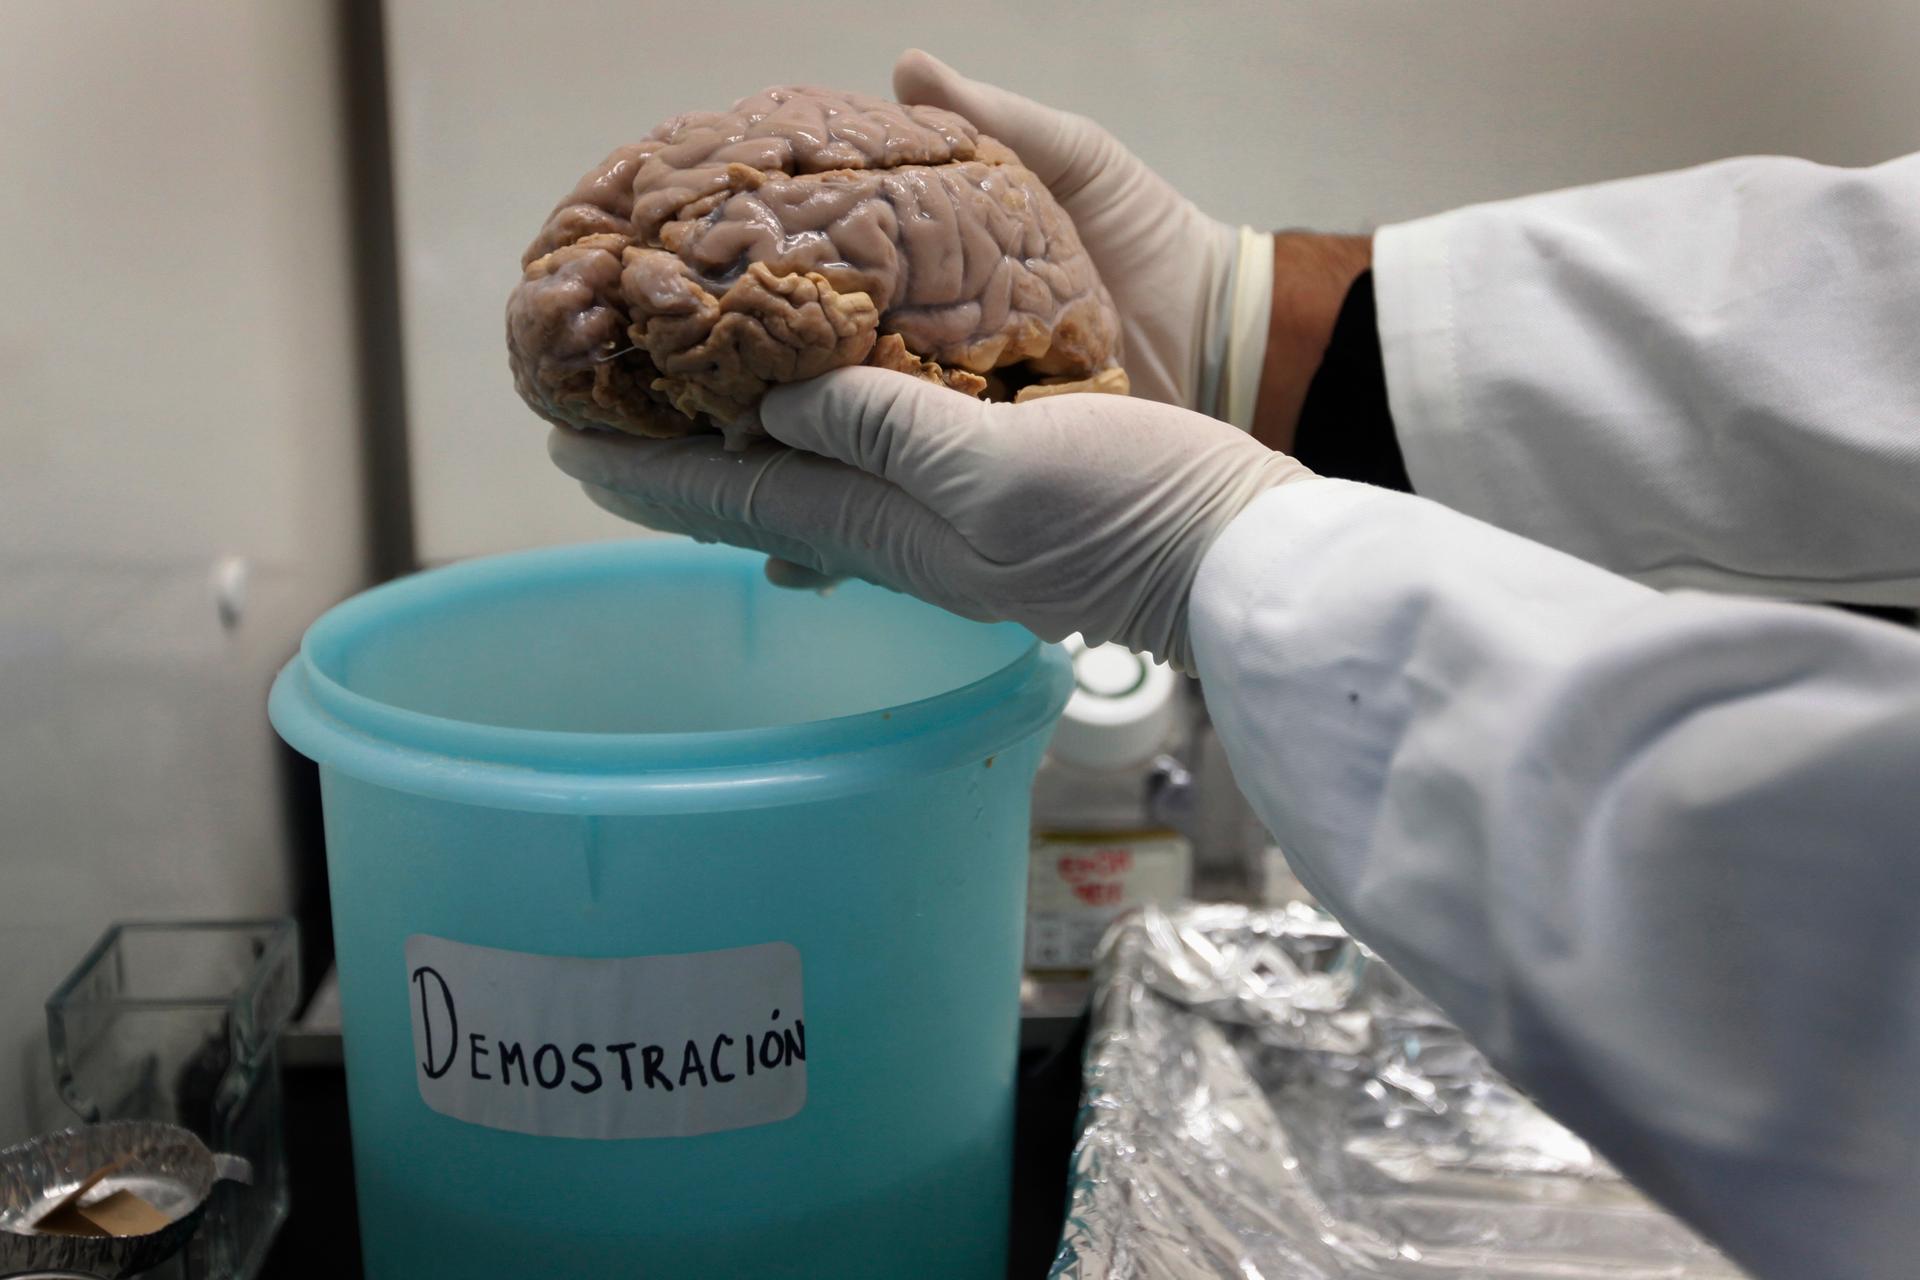 Jose Luna, an Alzheimer's researcher, shows an Alzheimer's patient's brain at Insituto Politecnico in Mexico City.